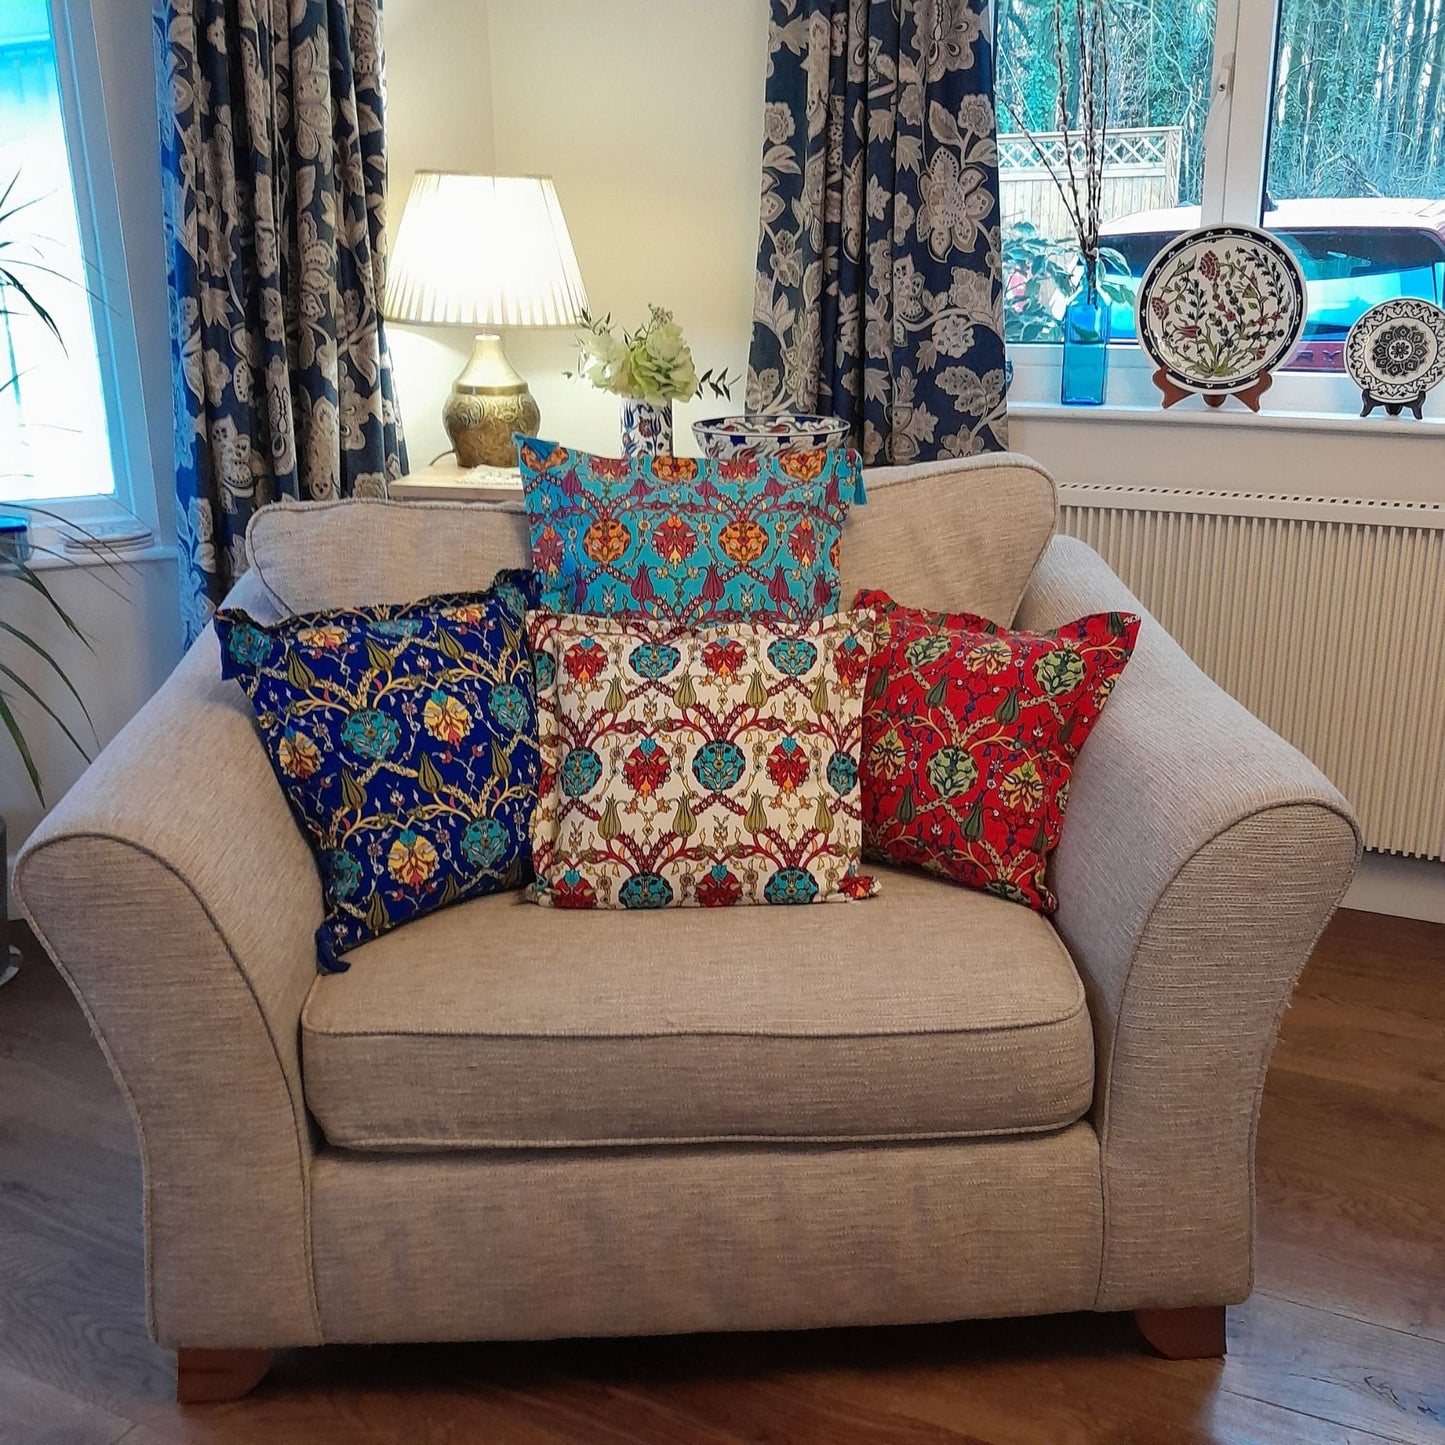 Turkish cotton cushion cover sets, turquoise, red, azure blue and red colours, tile inspired floral design